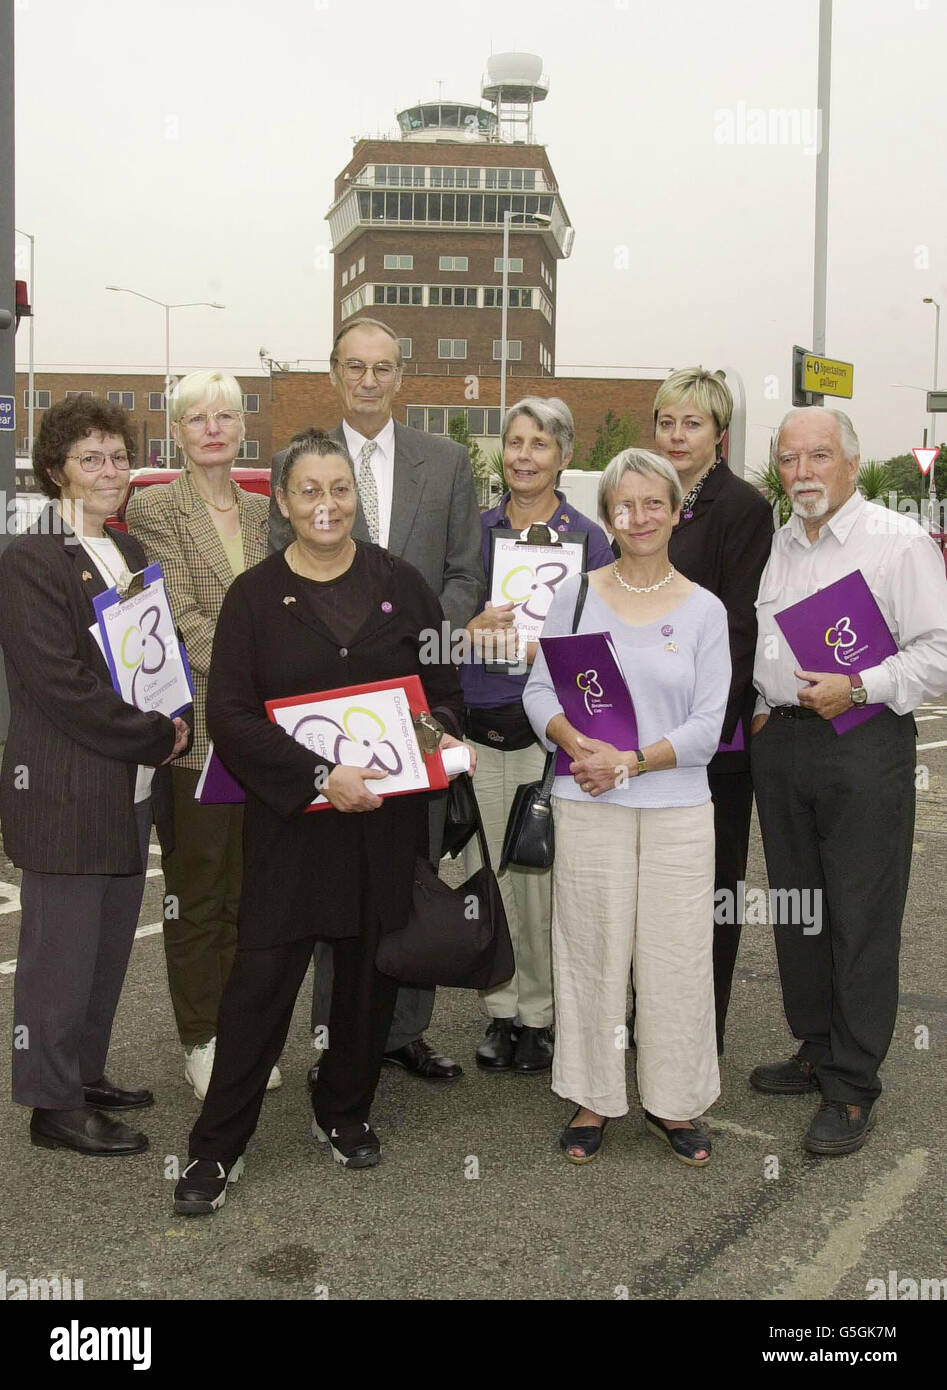 Eight volunteers who helped council family and friends involved in the US tragedy, during a press conference at Heathrow Airport. (Left to right) Dr. Lyn Franchino, from north Wales, Lorraine Johnson, from north Wales, Joy Caplin, fron Archway north London. * President of Cruse, Dr. Colin Murray-Parkes, from Chorley Wood, Gwen Aaron, from Bangor north Wales, Shirley Hill, from Reigate, Pam Snowden, from Leeds and Fred Harris, from Surrey. The eight of ten counsellors from British based 'Cruse Bereavement Care' flew to the USA to comfort the first wave of relatives to arrive in New York. Stock Photo